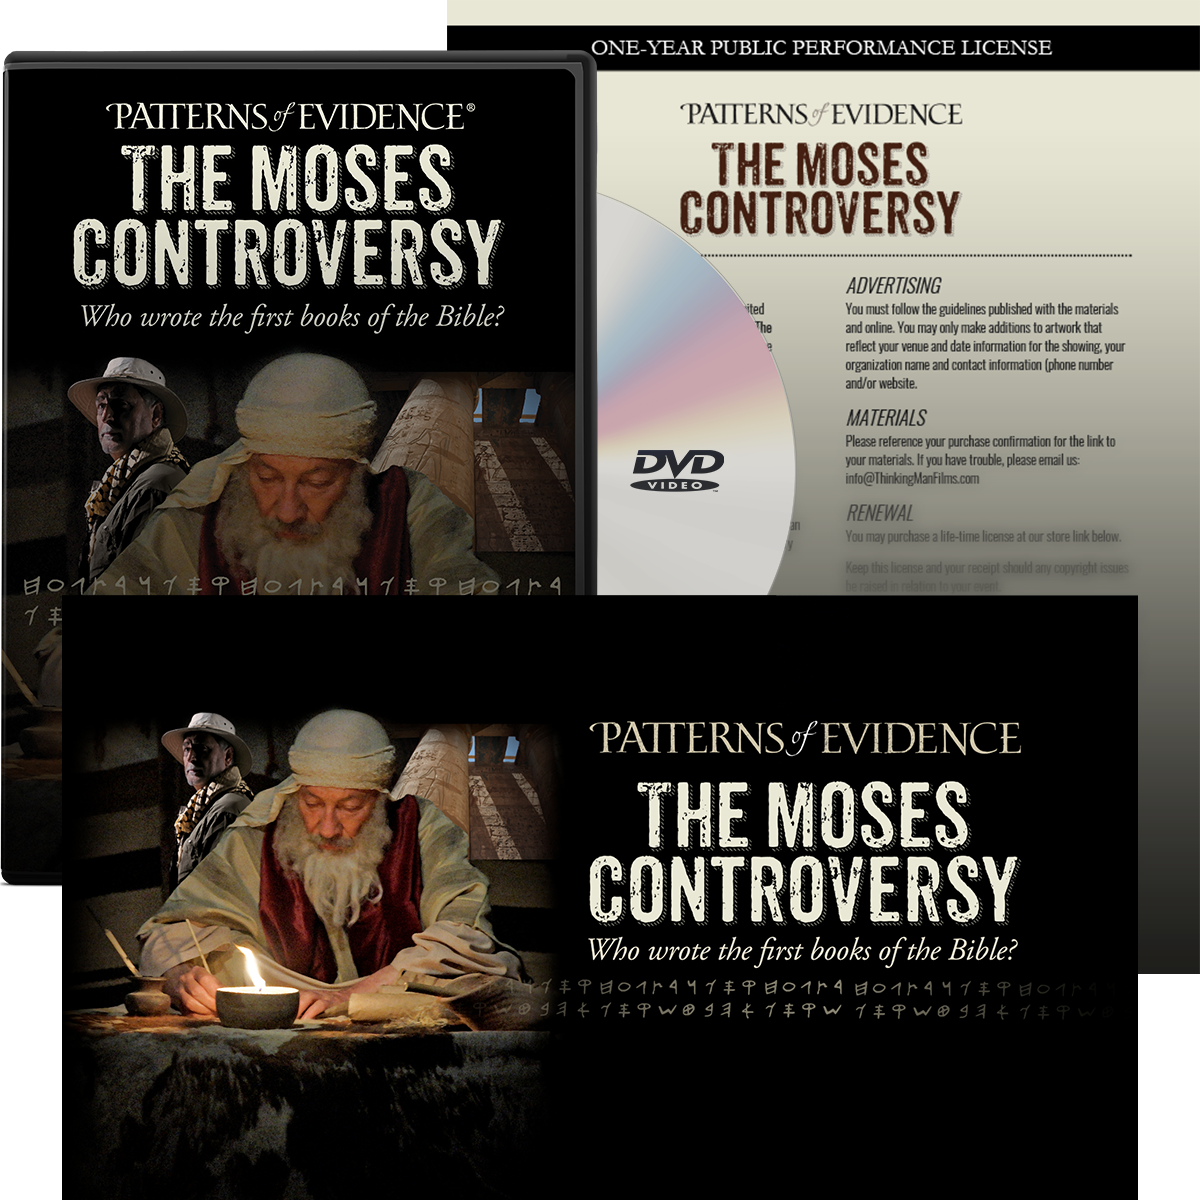 The Moses Controversy DVD/Digital - Movie Event Kit